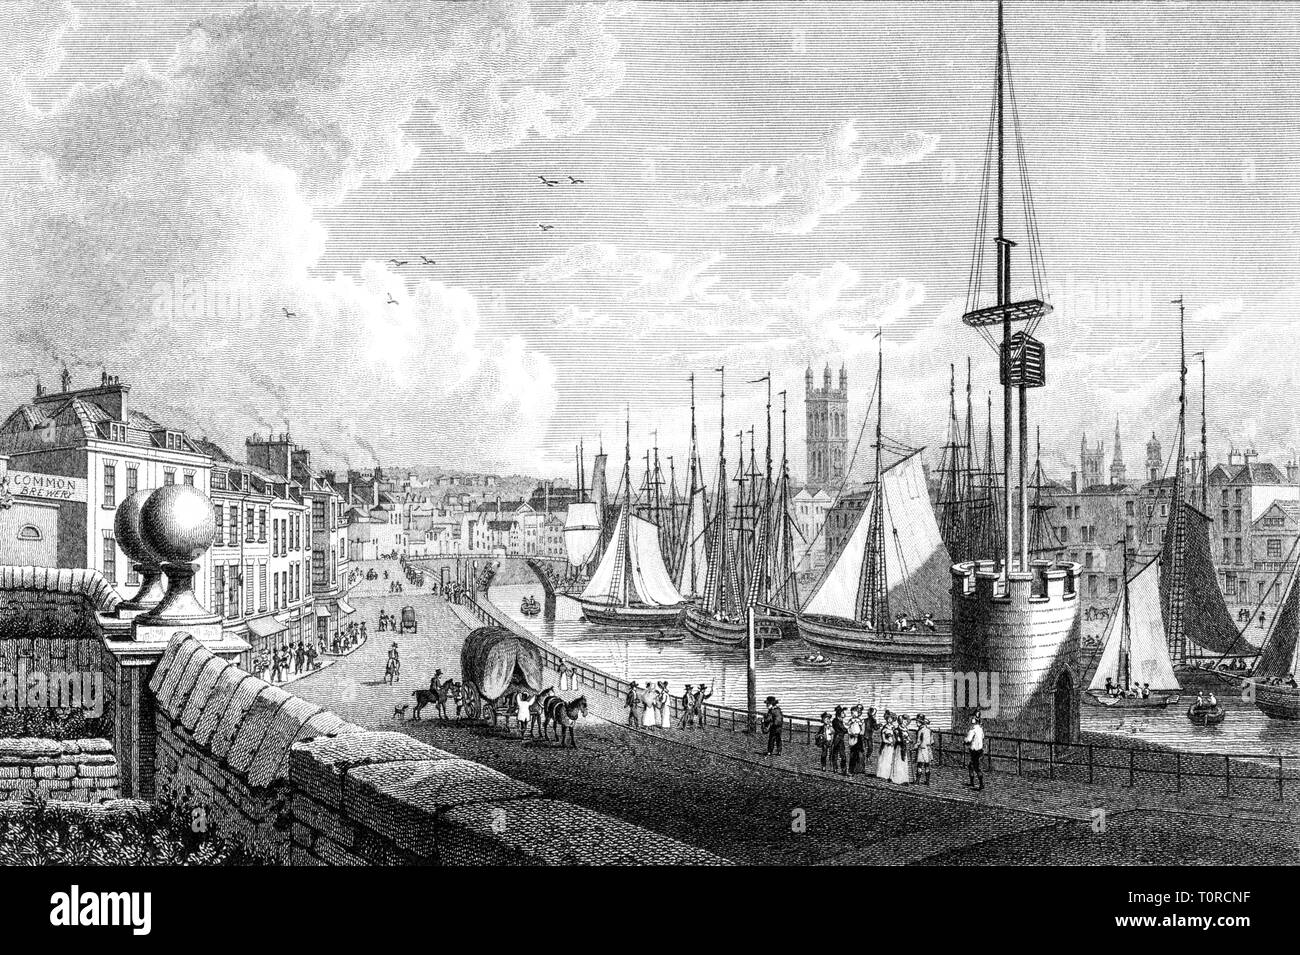 An engraving of Bristol UK scanned at high resolution from a book published in 1825. Believed copyright free. Stock Photo